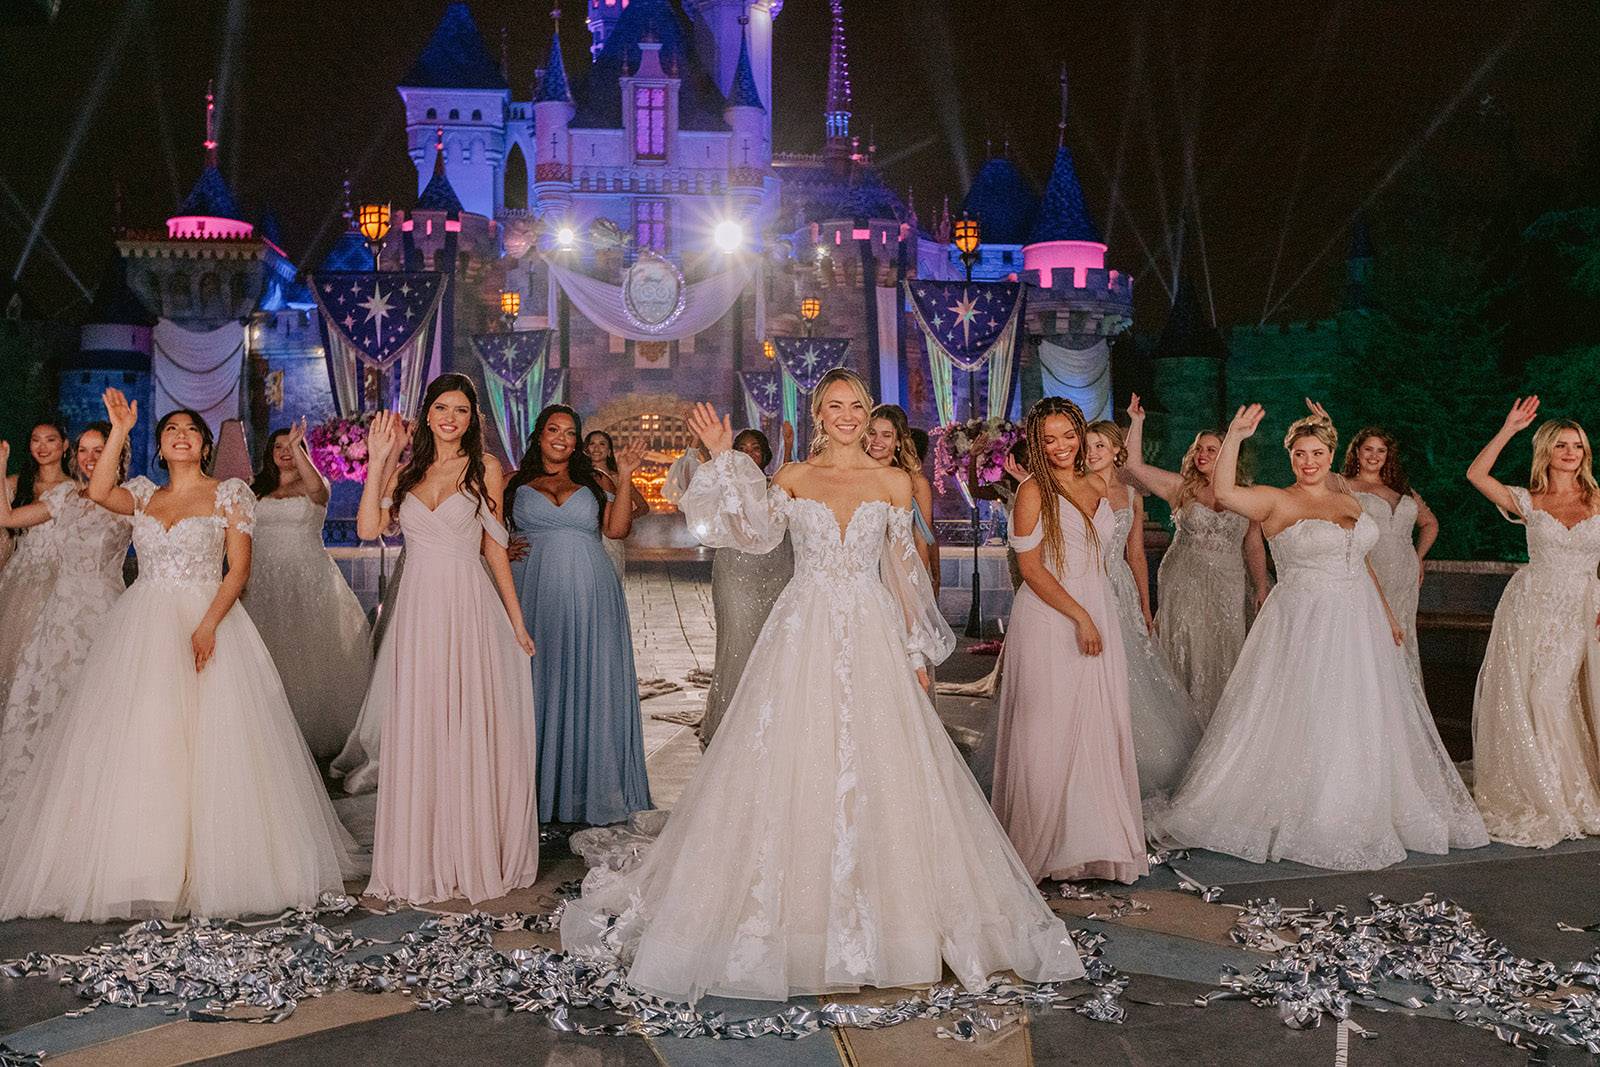 Disney-inspired gowns let brides become princess for day | Daily Mail Online